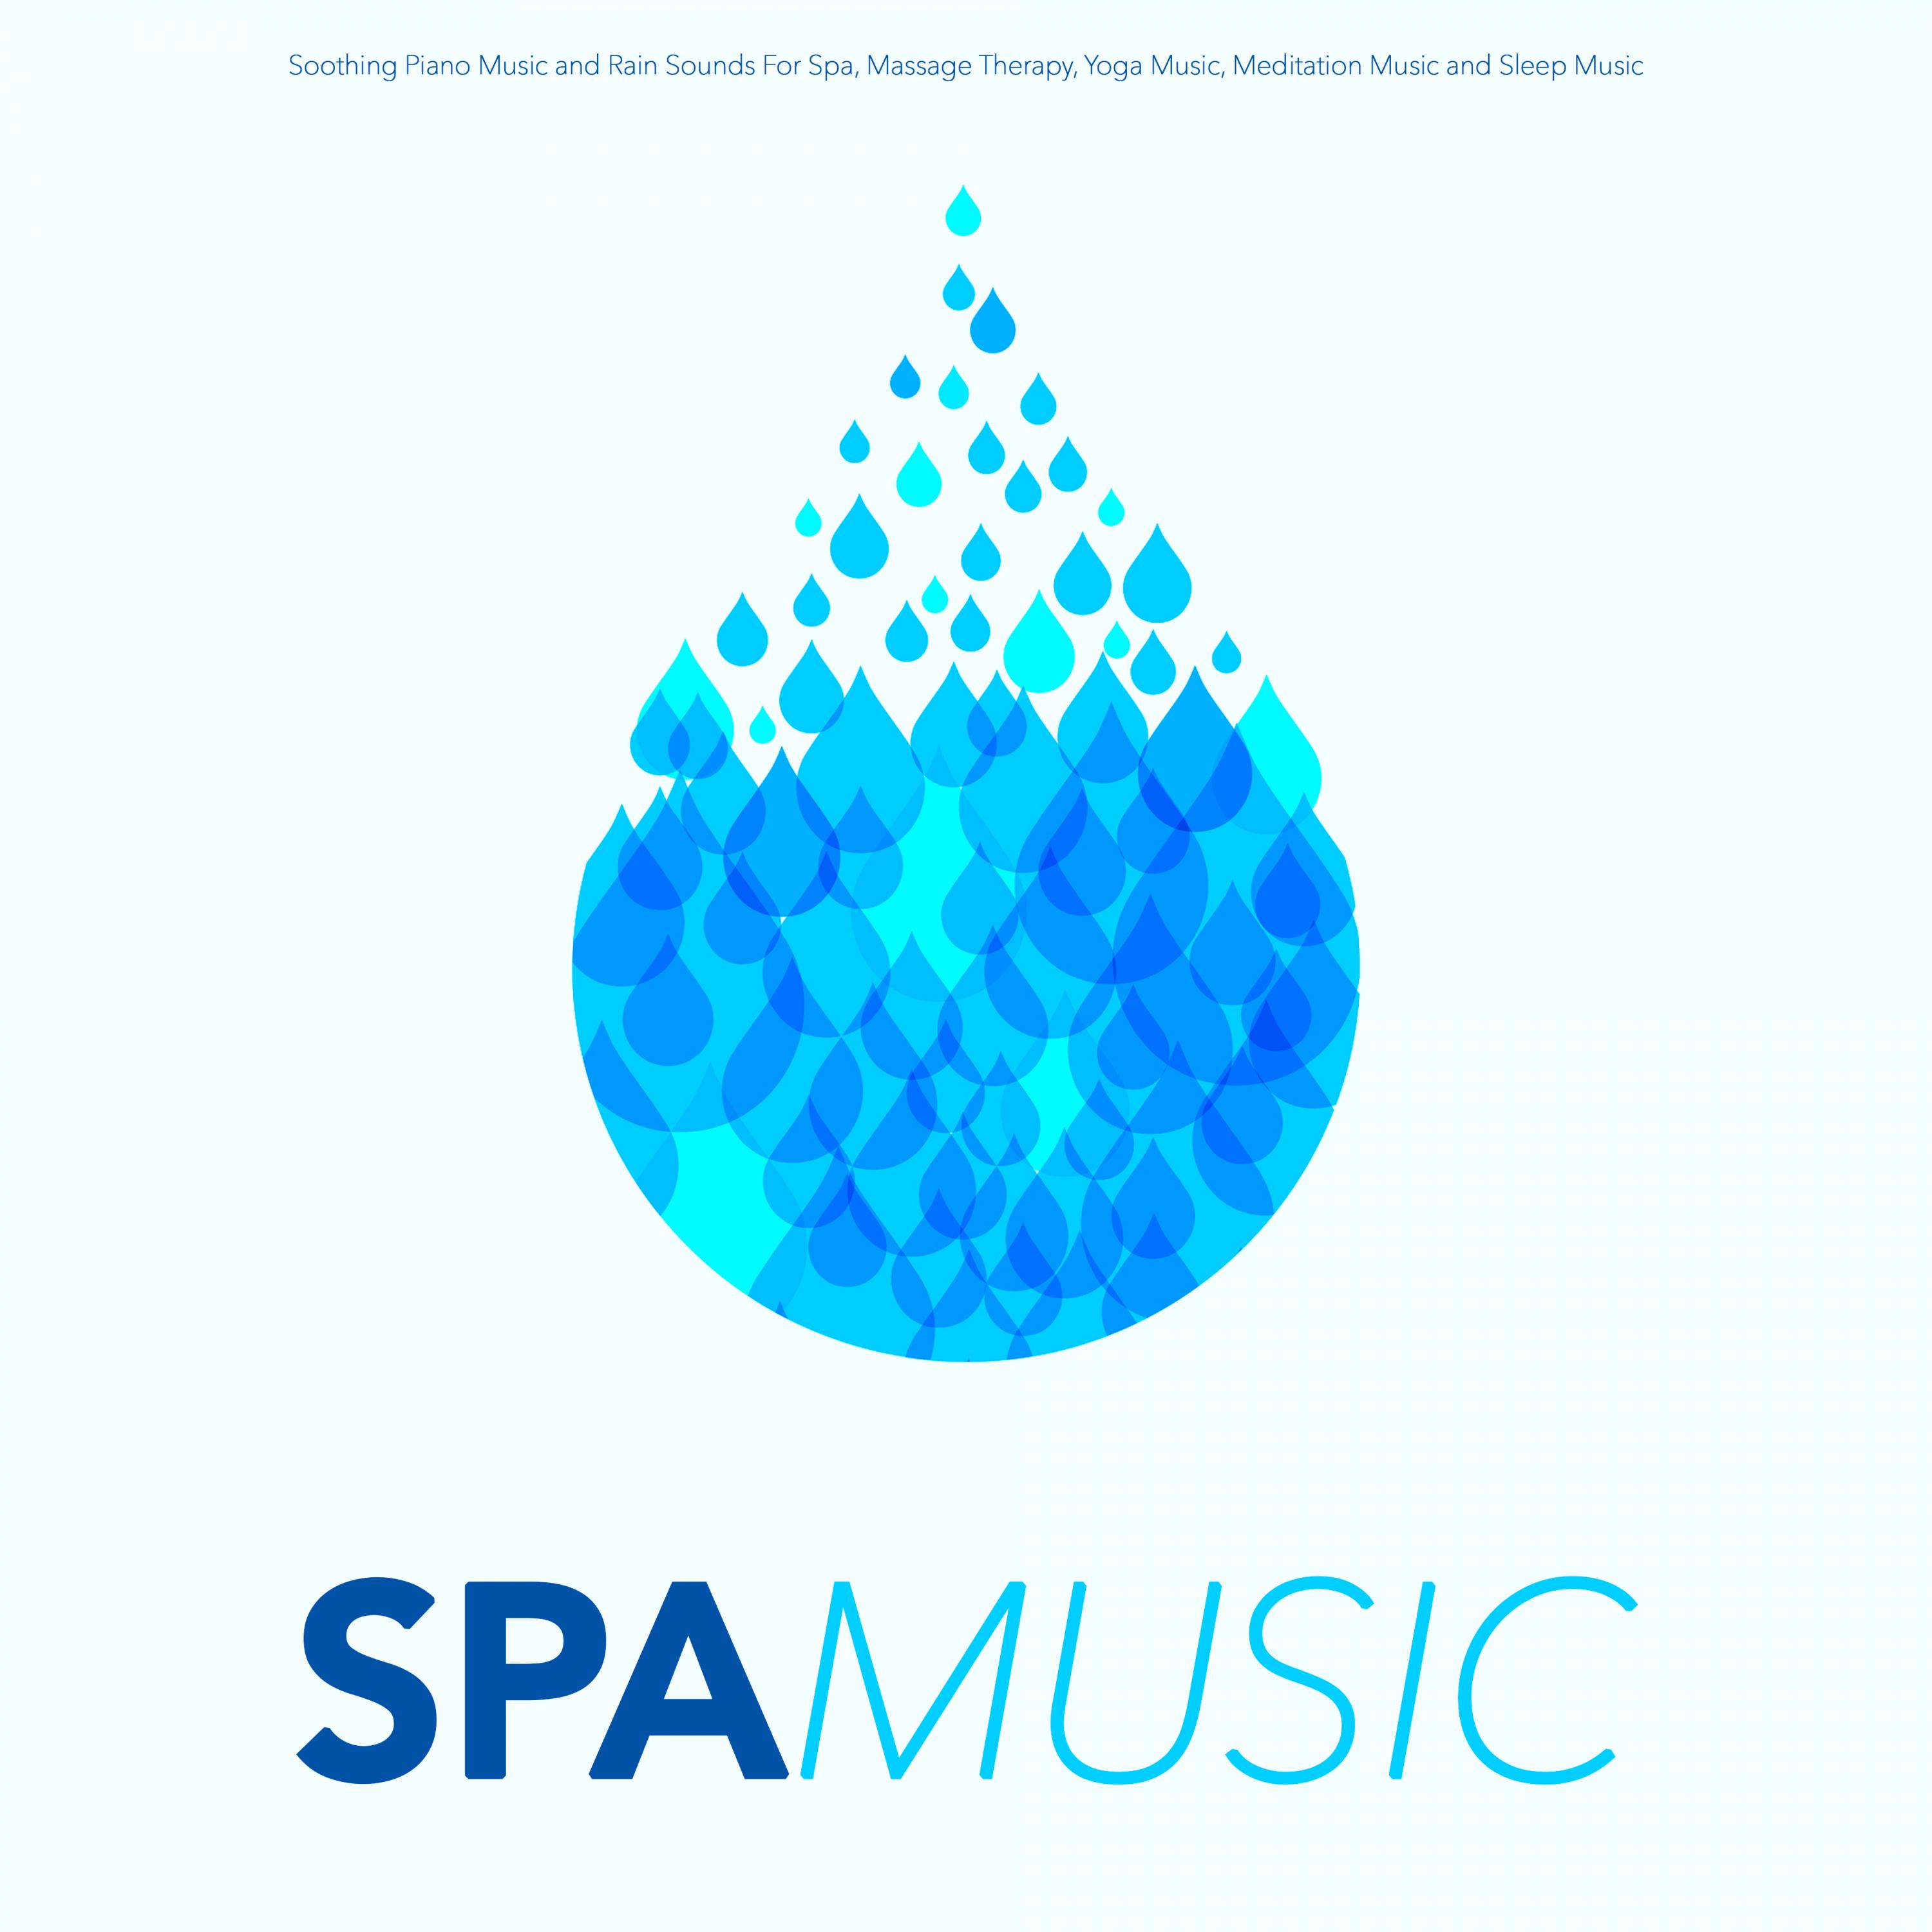 Spa Music: Soothing Piano Music and Rain Sounds For Spa, Massage Therapy, Yoga Music, Meditation Music and Sleep Music